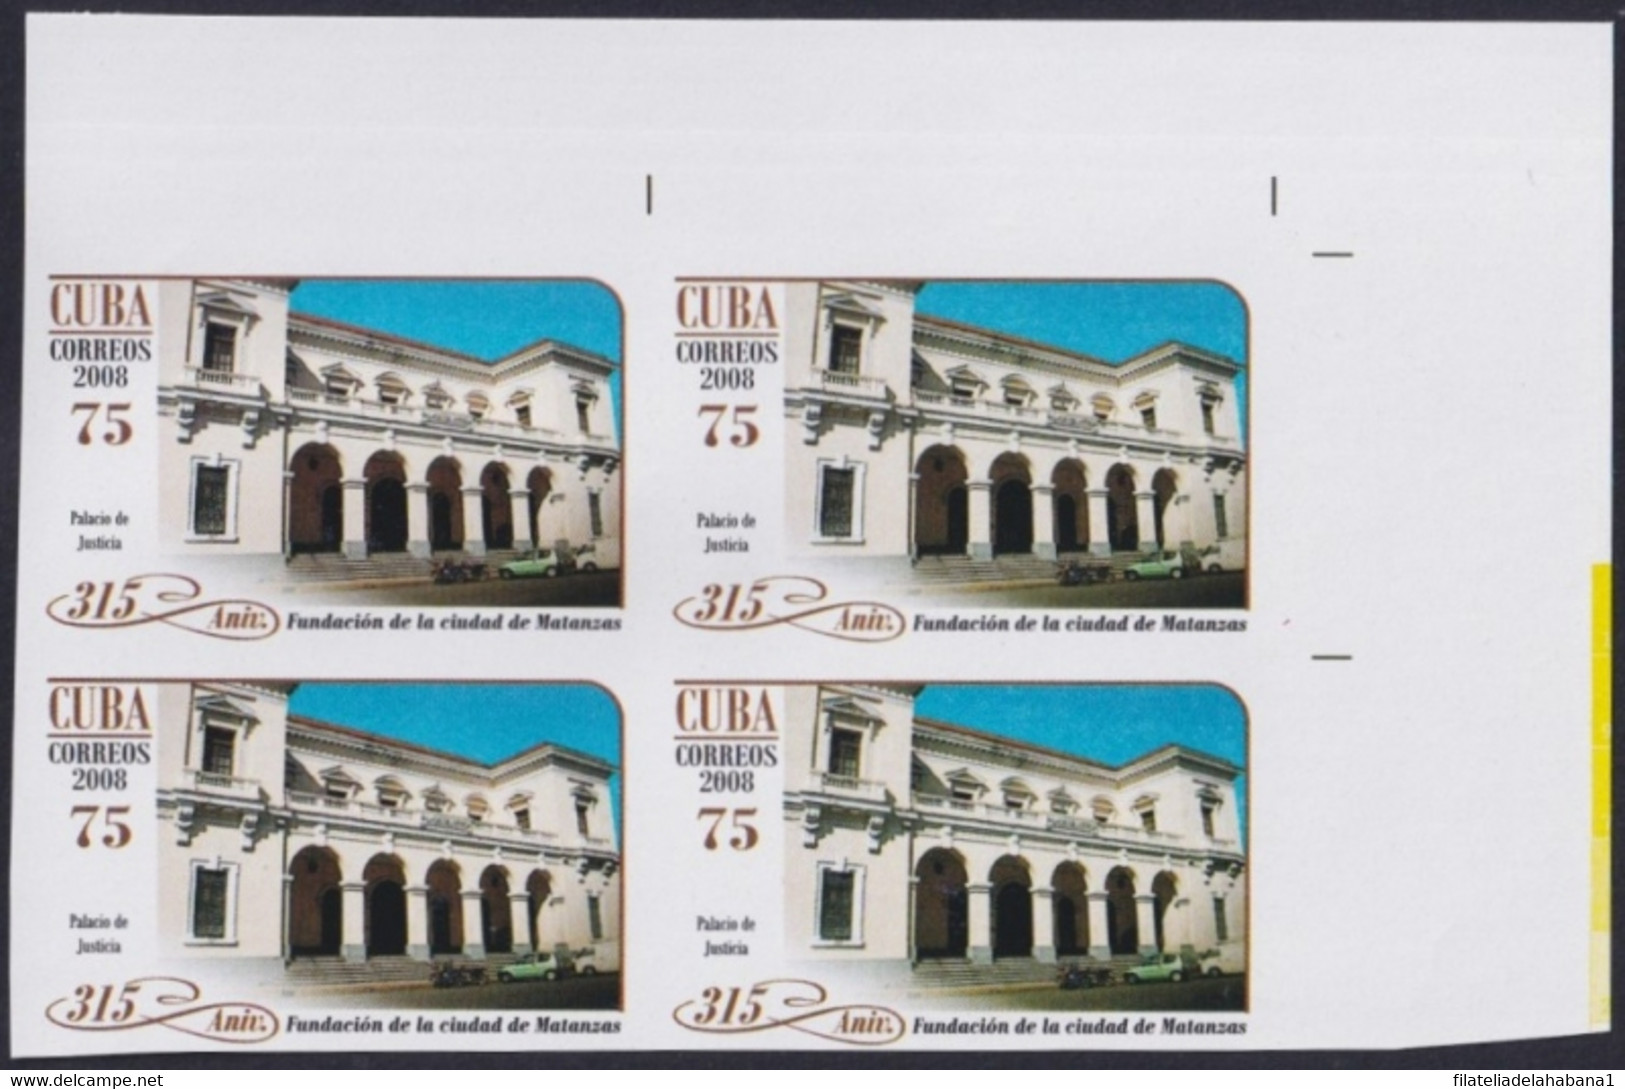 2008.412 CUBA 2008 75c MNH IMPERFORATED PROOF MATANZAS FOUNDATION PALACE OF JUSTICE. - Imperforates, Proofs & Errors